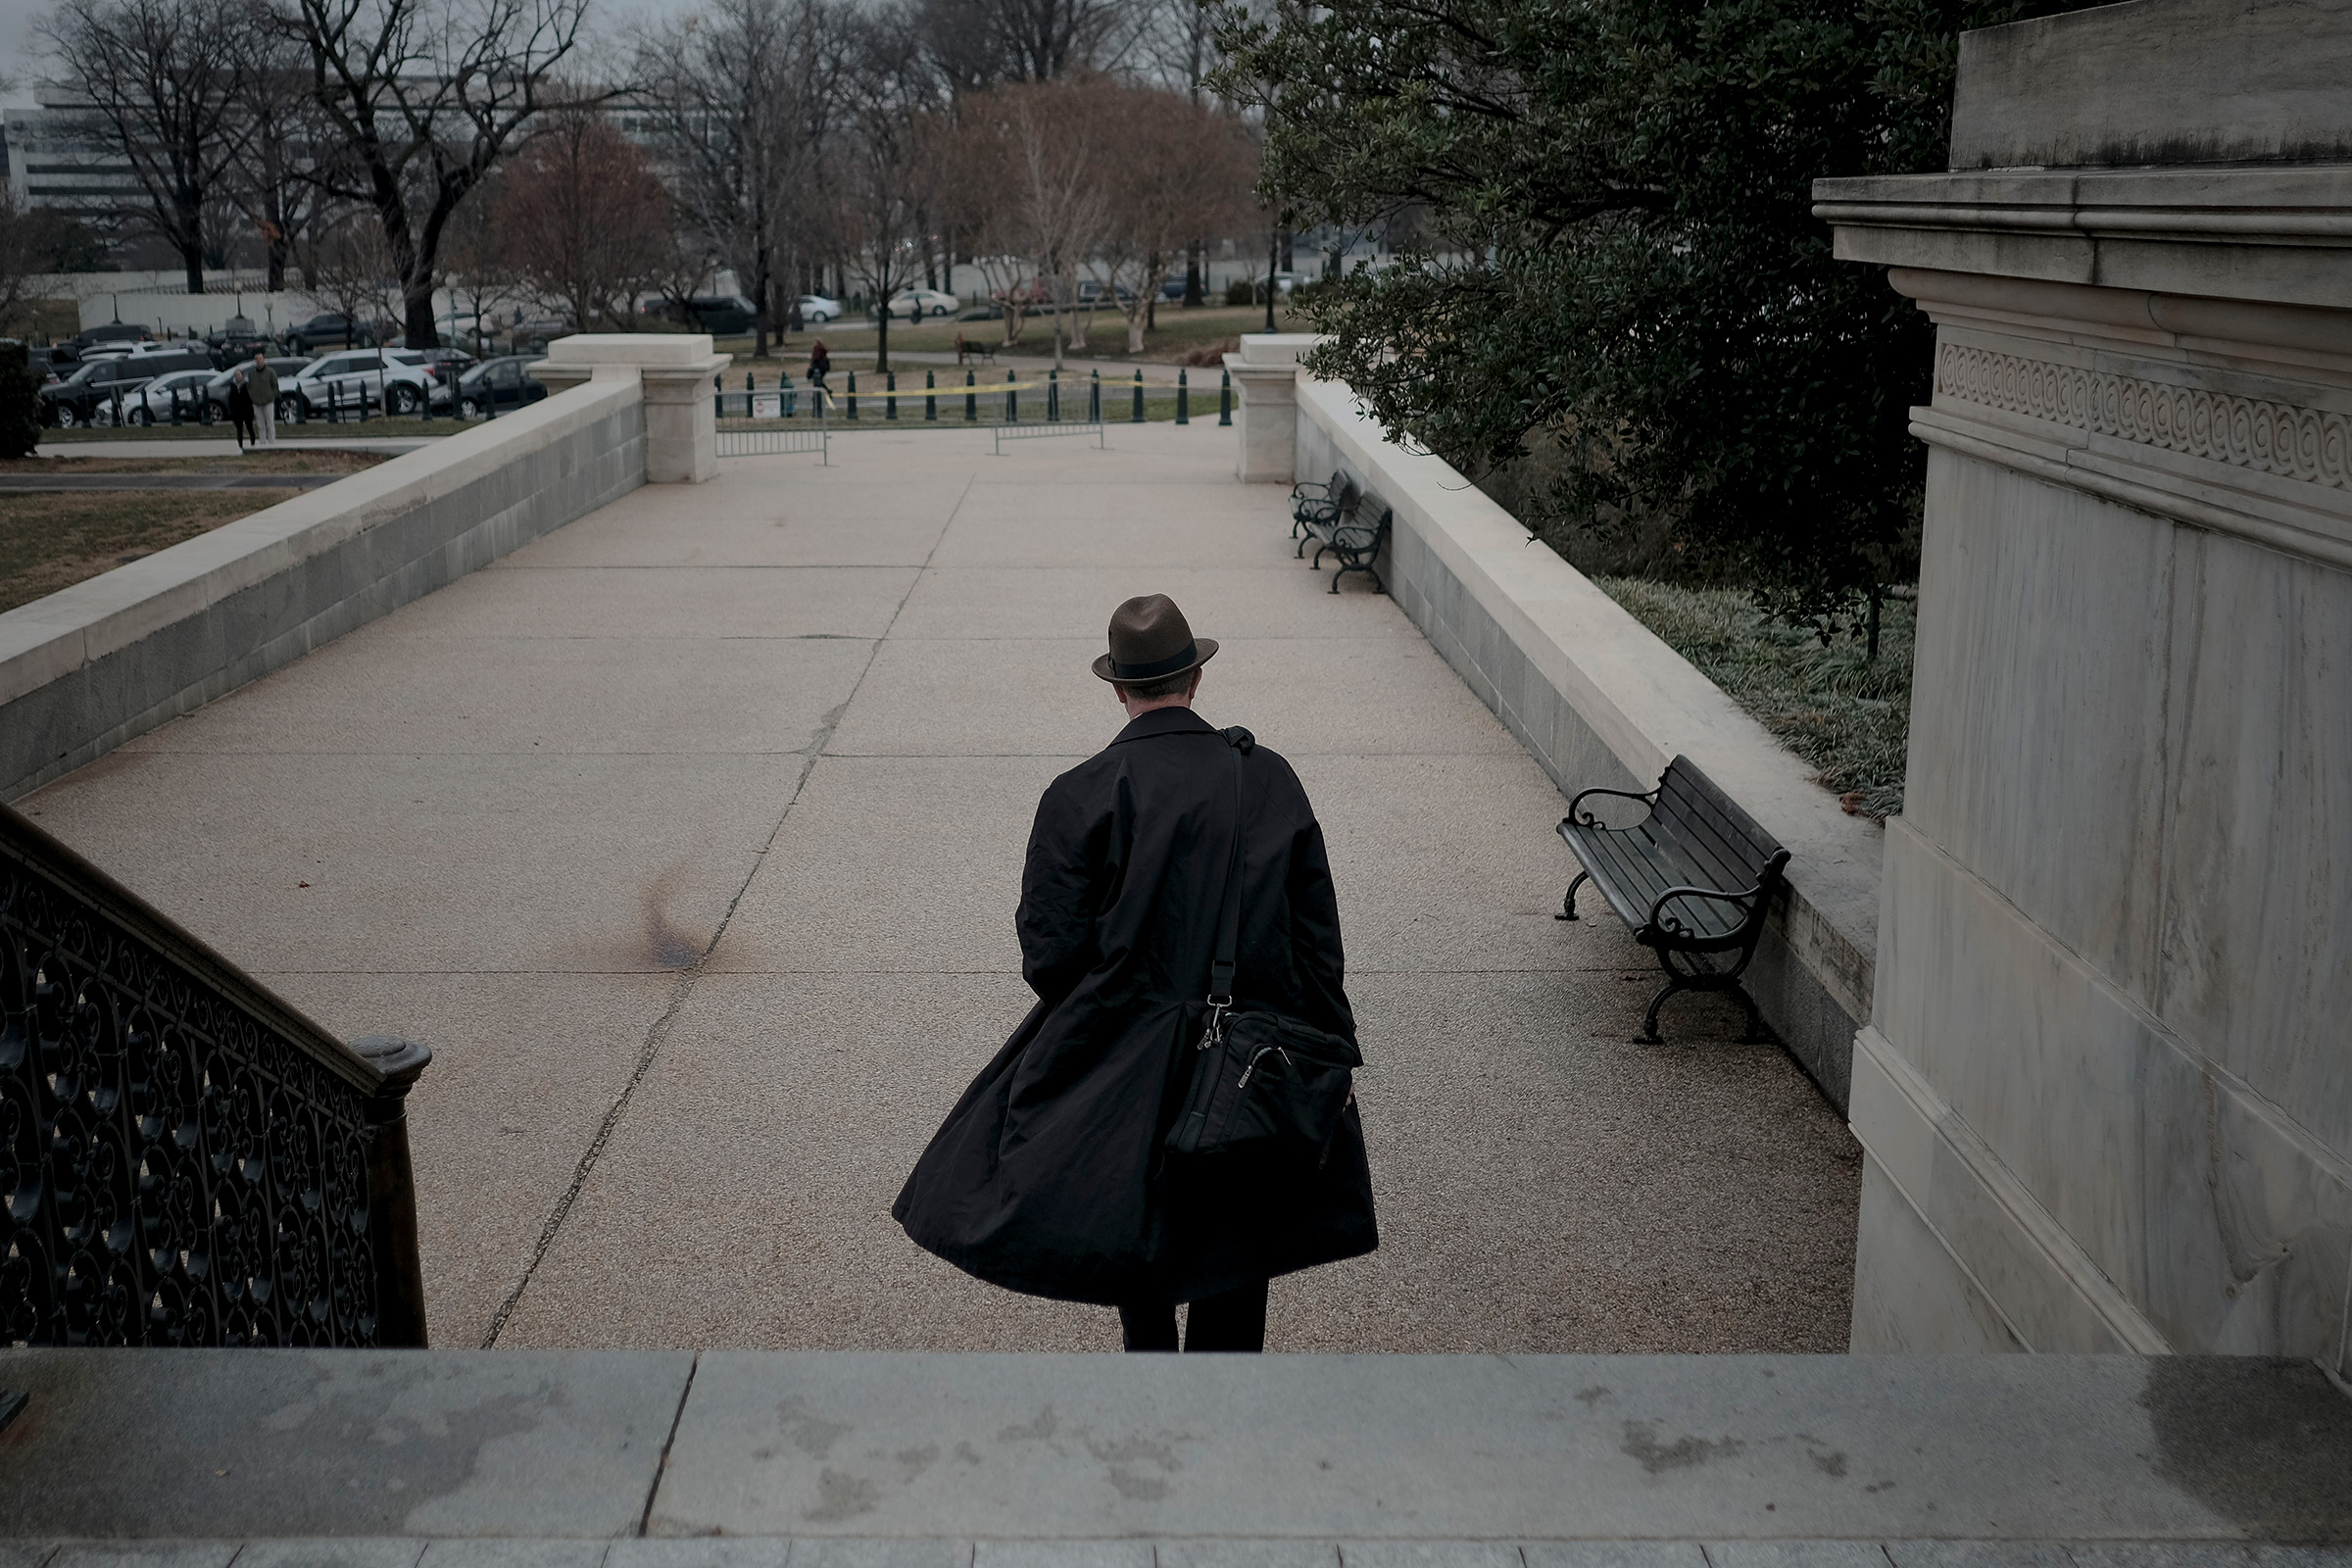 White House legislative director Eric Ueland leaves the Capitol after the impeachment trial in Washington, D.C., on Jan. 25, 2020. (Gabriella Demczuk for TIME)